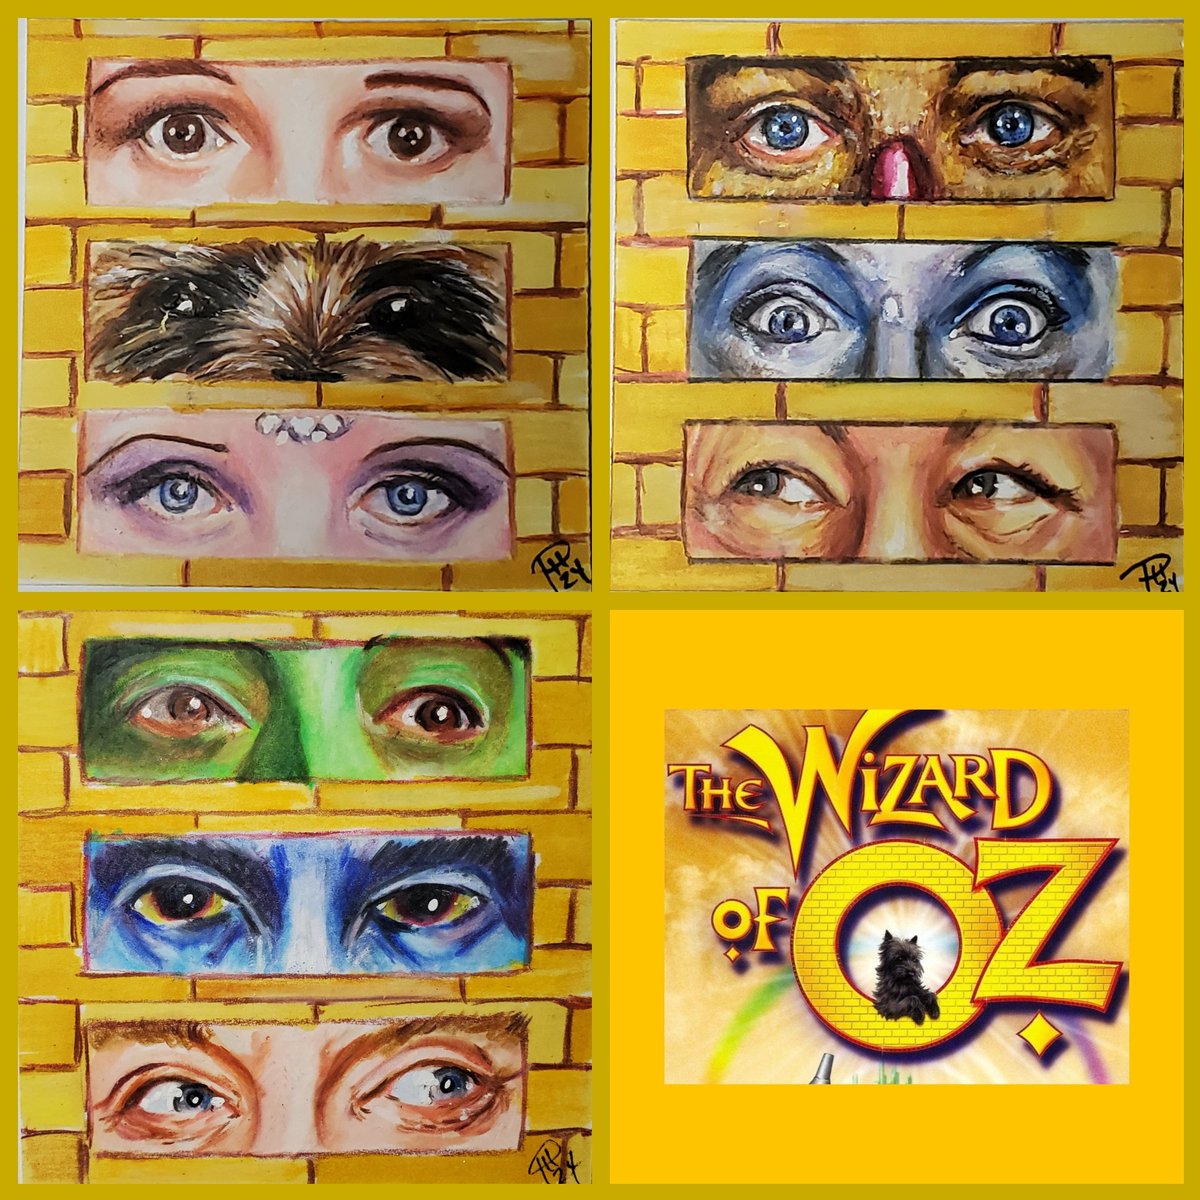 Always a fun time when I get commissioned to draw one of my 'Tri-Eye' pieces, let alone 3 sets from the Wizard of Oz. Enjoy! 
3.5x3.5' hand-drawn on card stock
 #thewizardofoz #wizardofoz #theresnoplacelikehome #yellowbrickroad #eyes